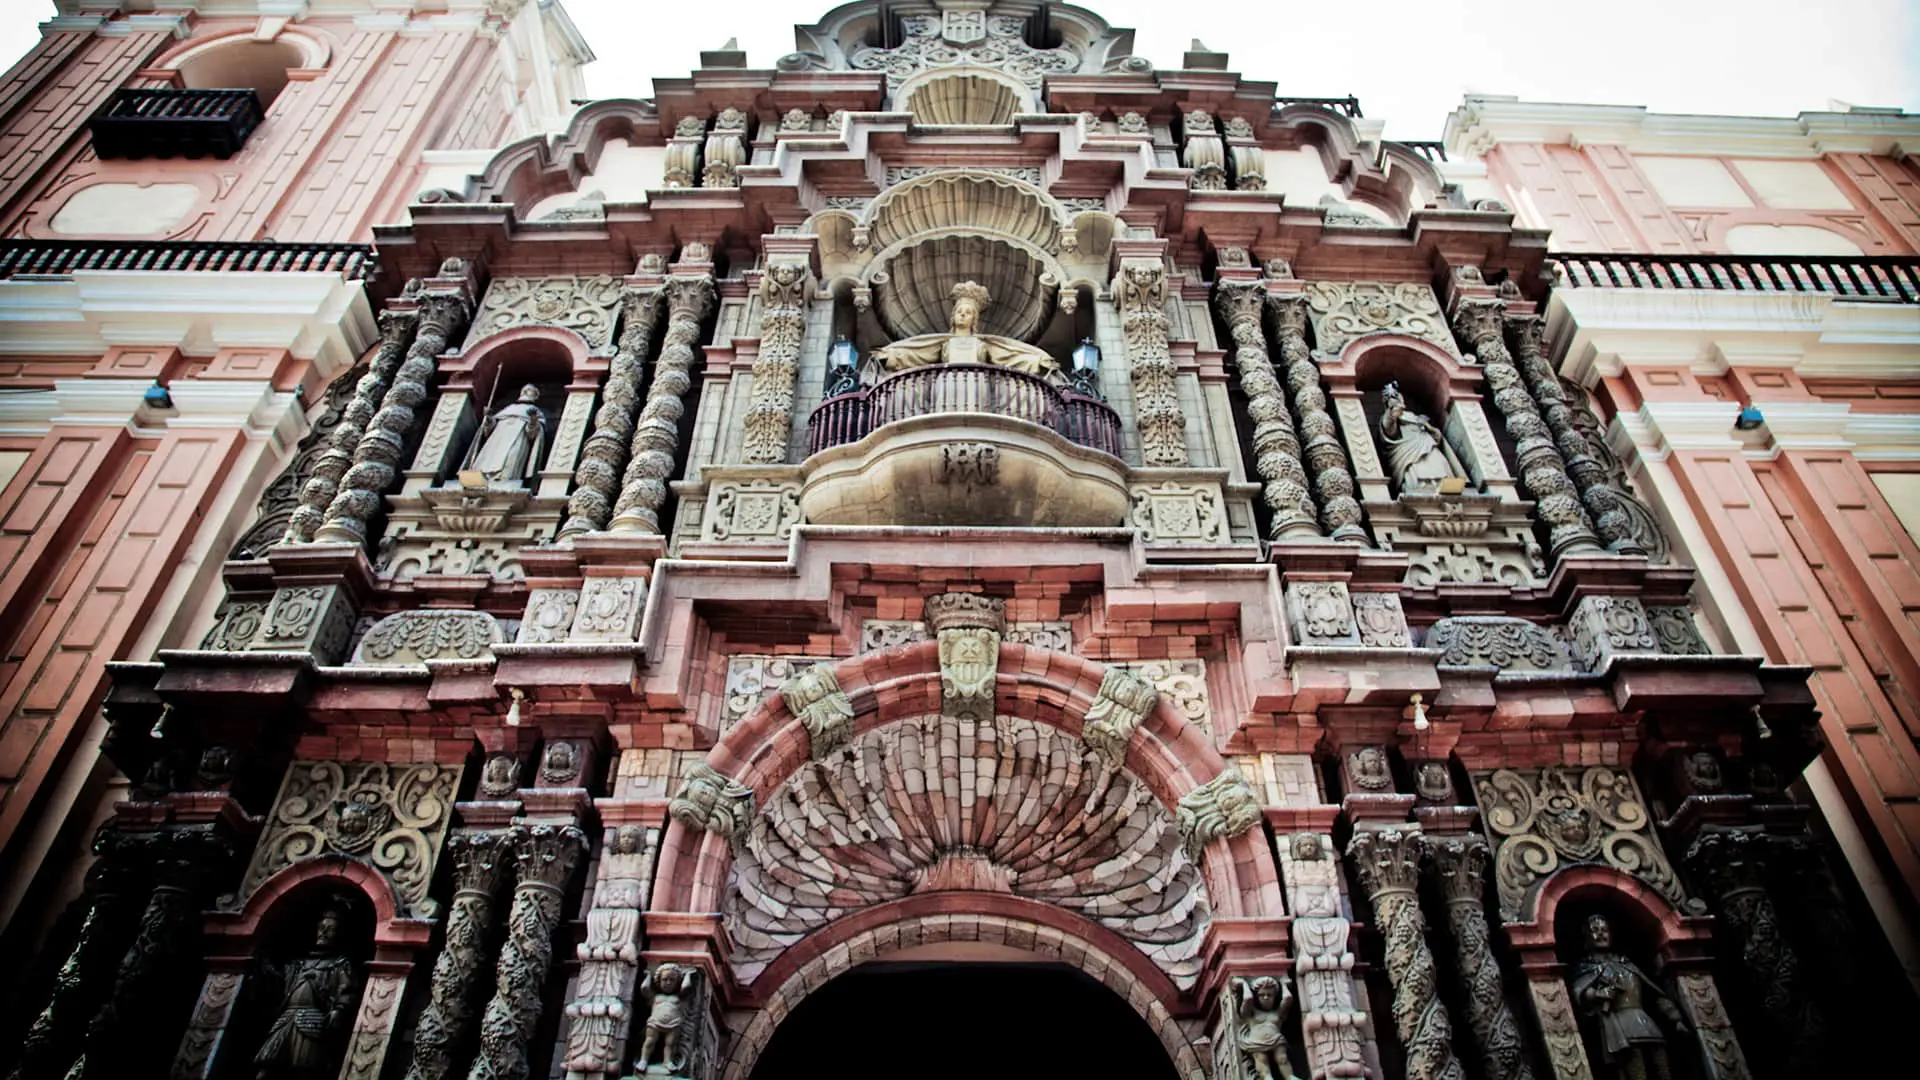 Highly adorned pink and white fachade of La Merced church | Responsible Travel Peru